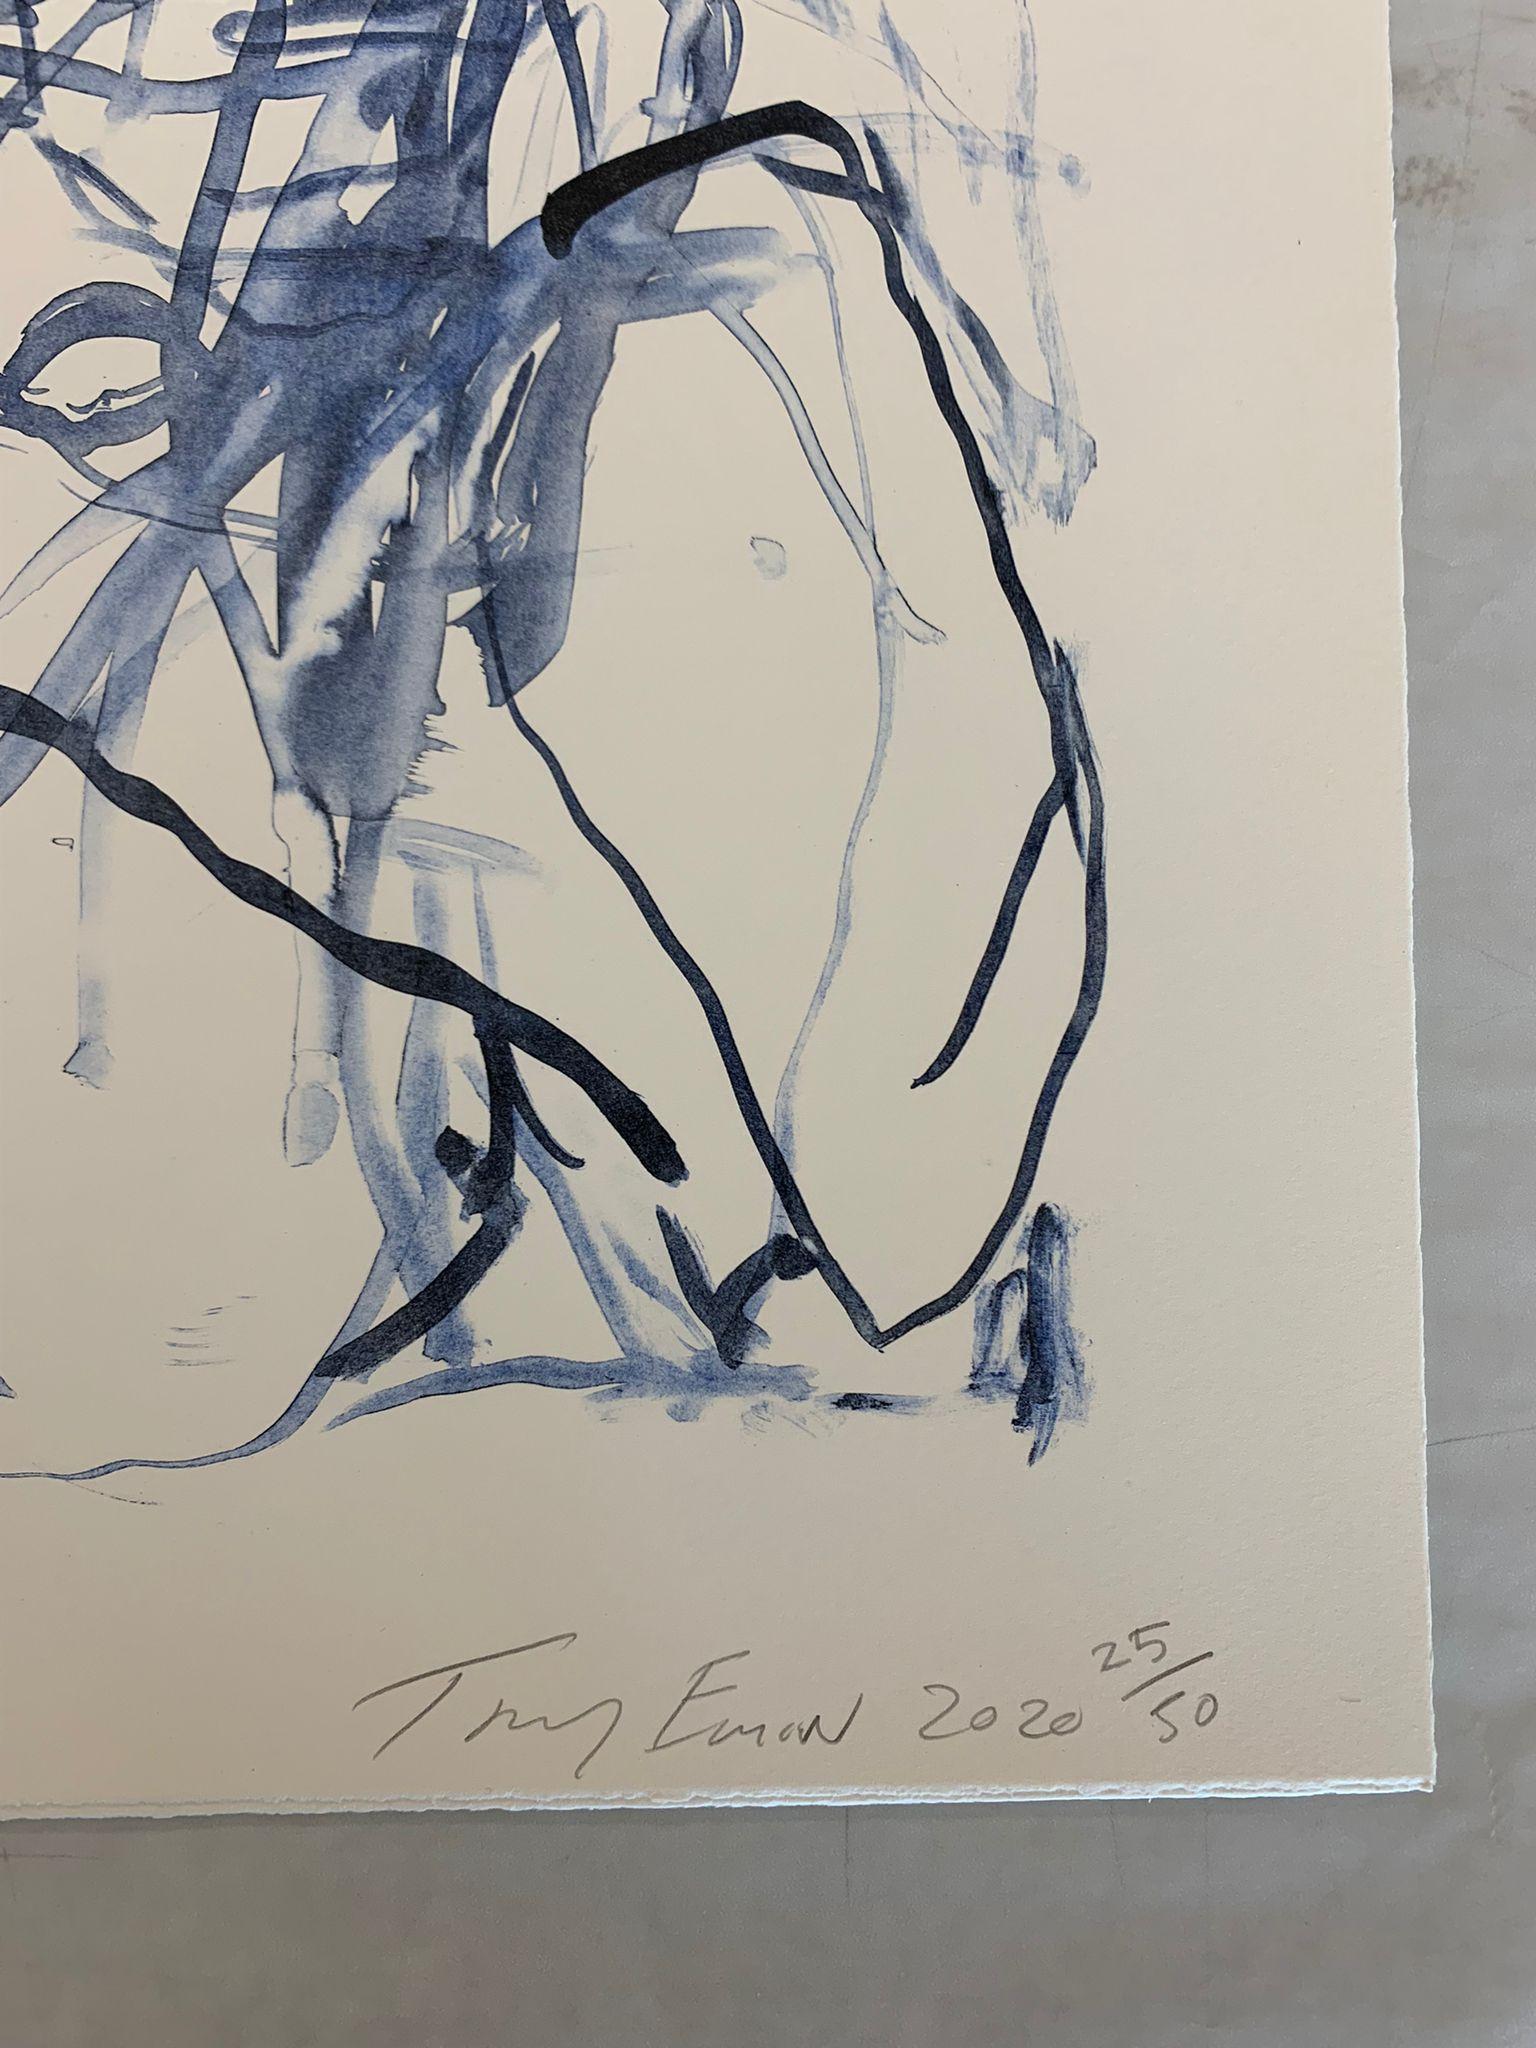 These Feelings Were True -Emin, Contemporary, YBAs, Lithograph, Blue, Portrait For Sale 8